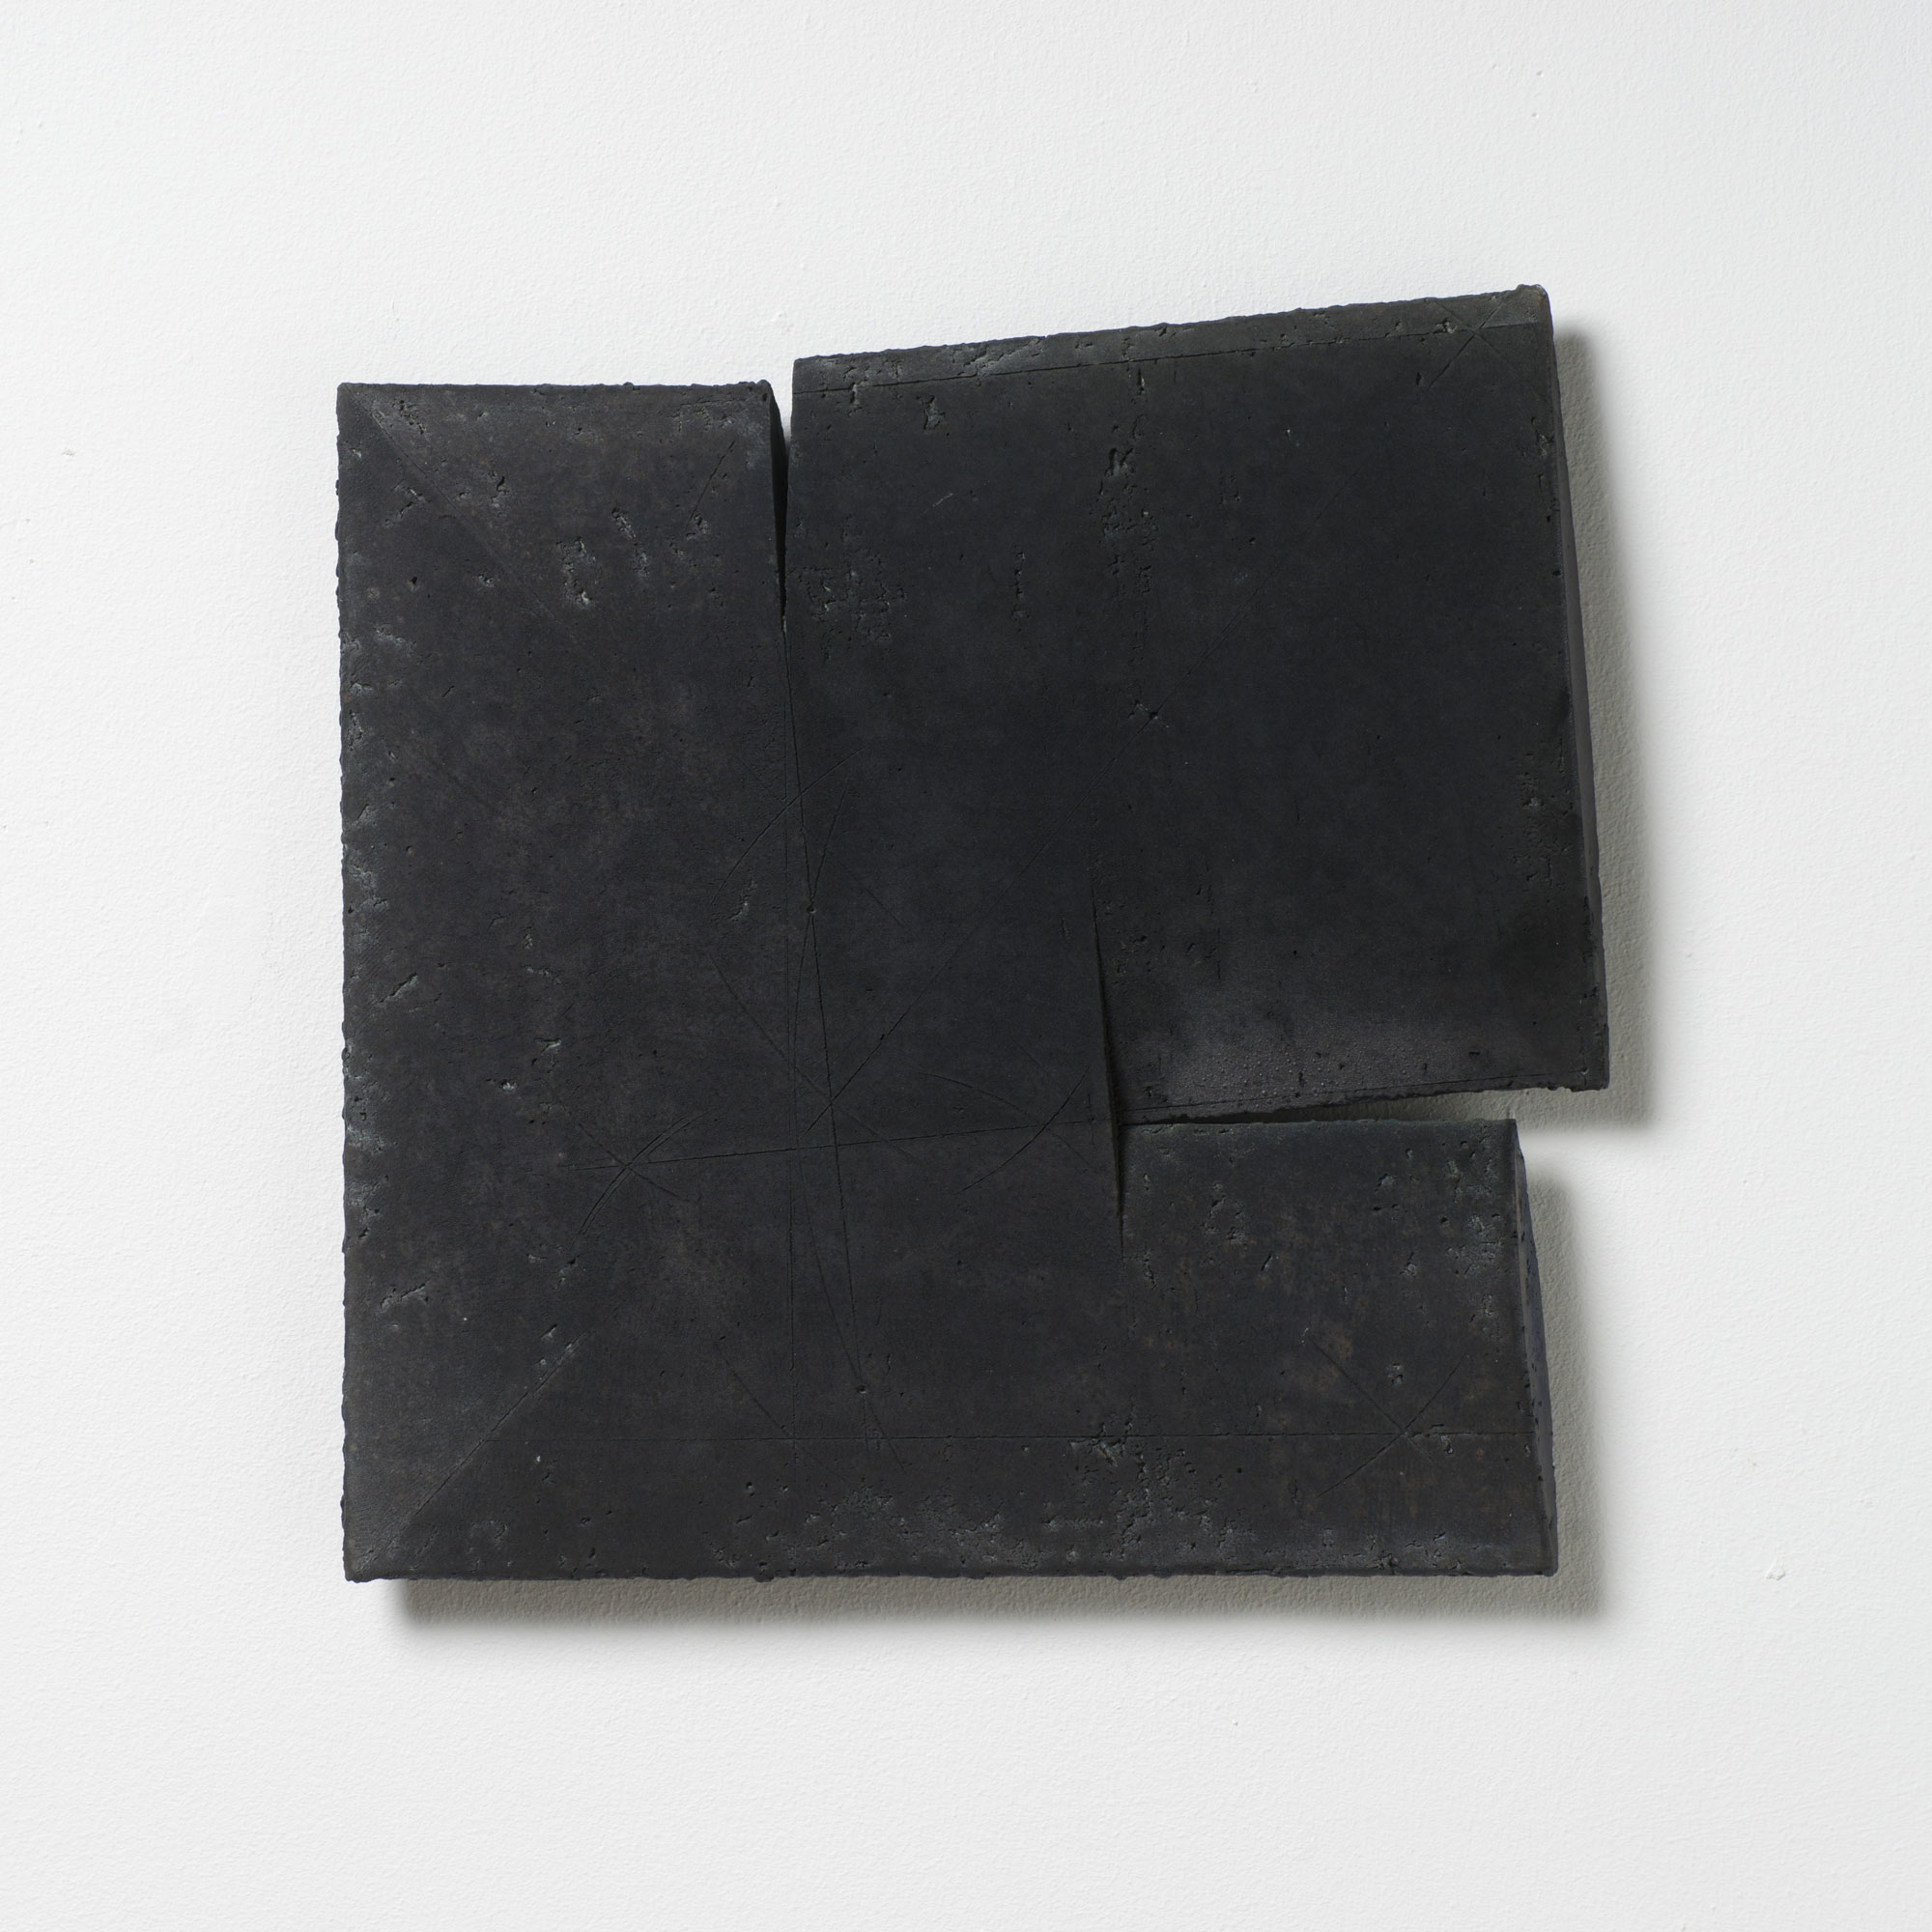 Out-of-square #3 - Oxides and dry glazes on stoneware - 37,3 x 38,2 x 2,5 cm - 2013